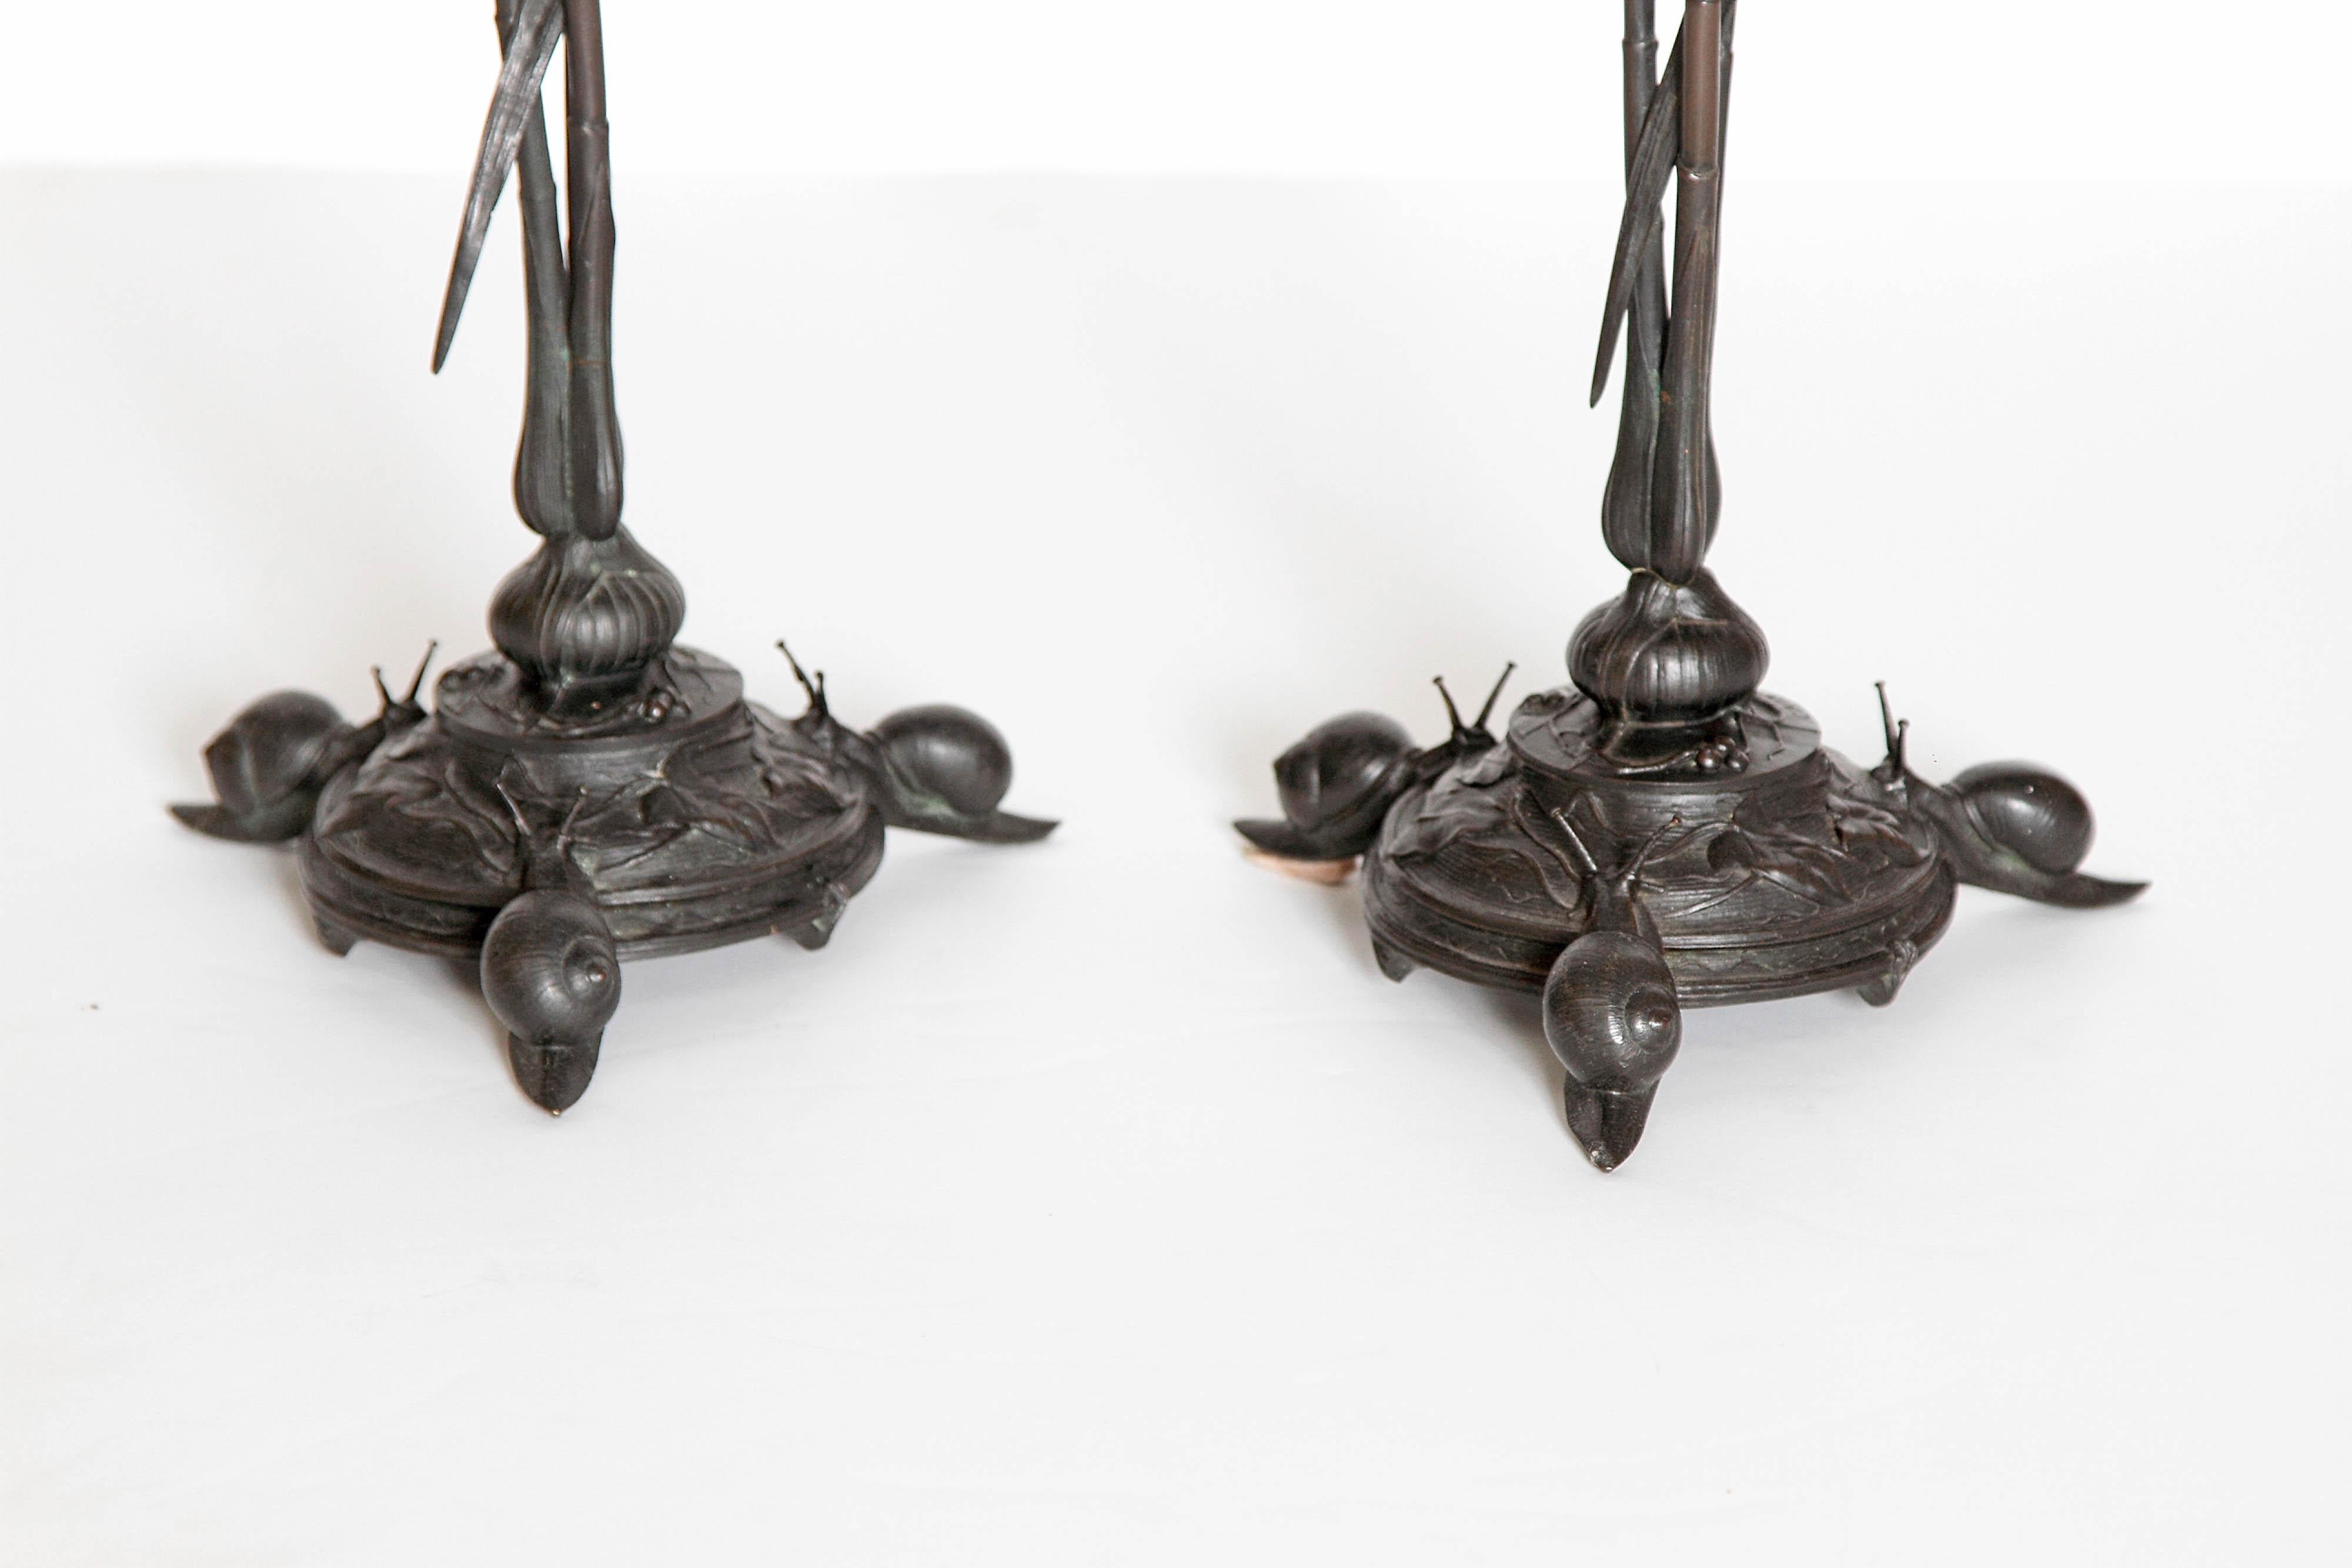 Auguste-Nicolas Cain, Pair of French Candelabra with Bird's Nest 4